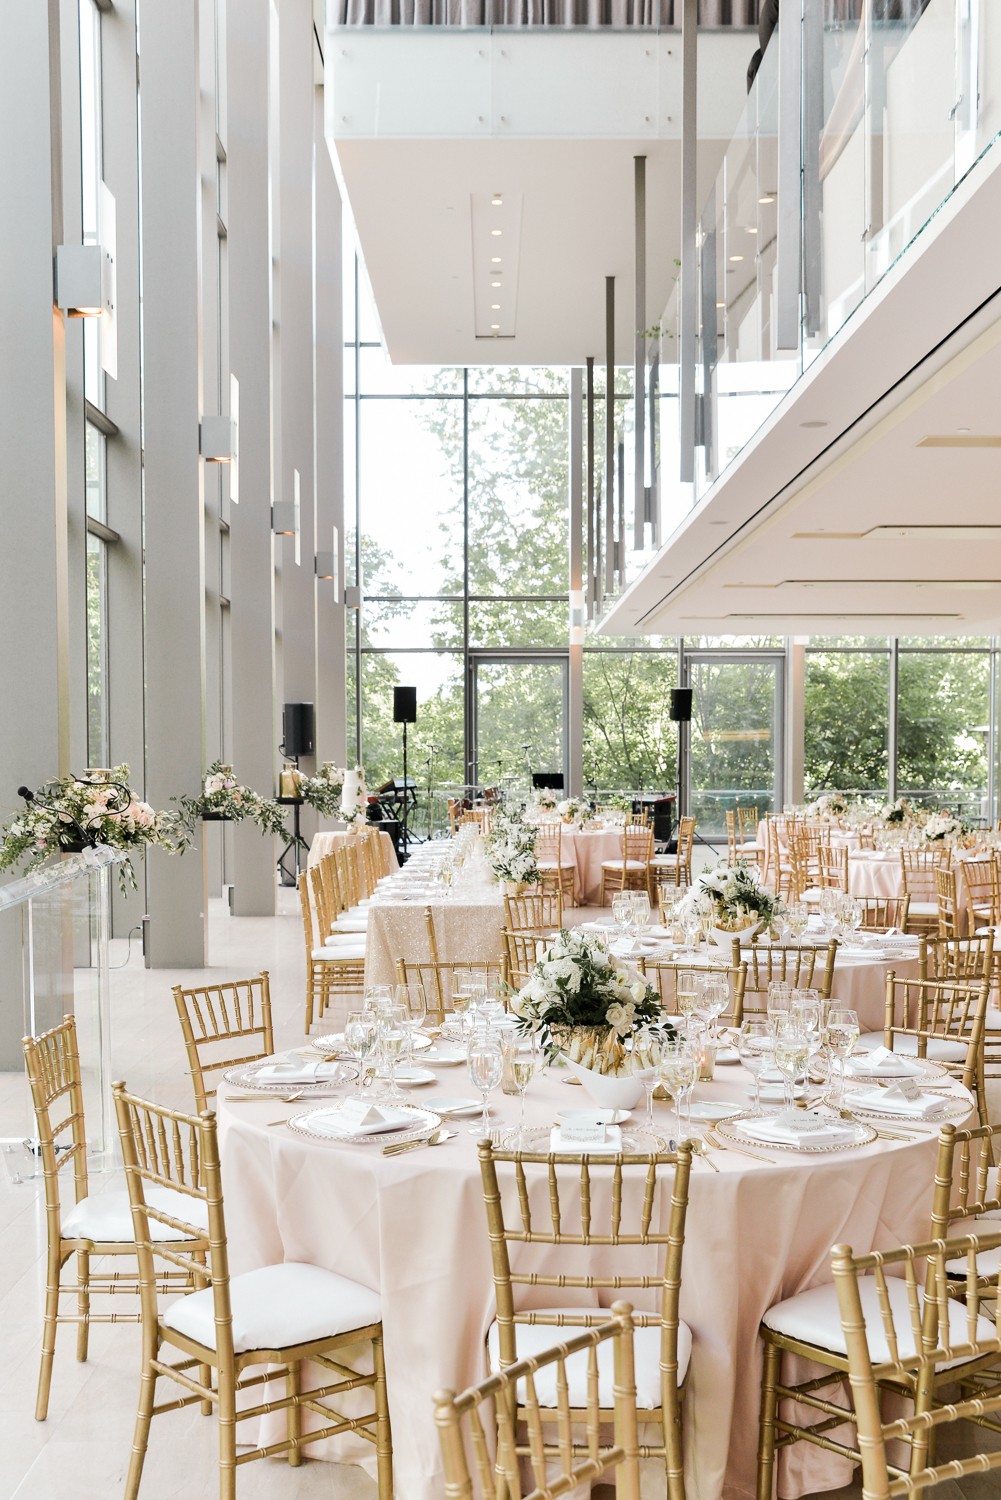 Blush and gold wedding decor at the royal conservatory of music